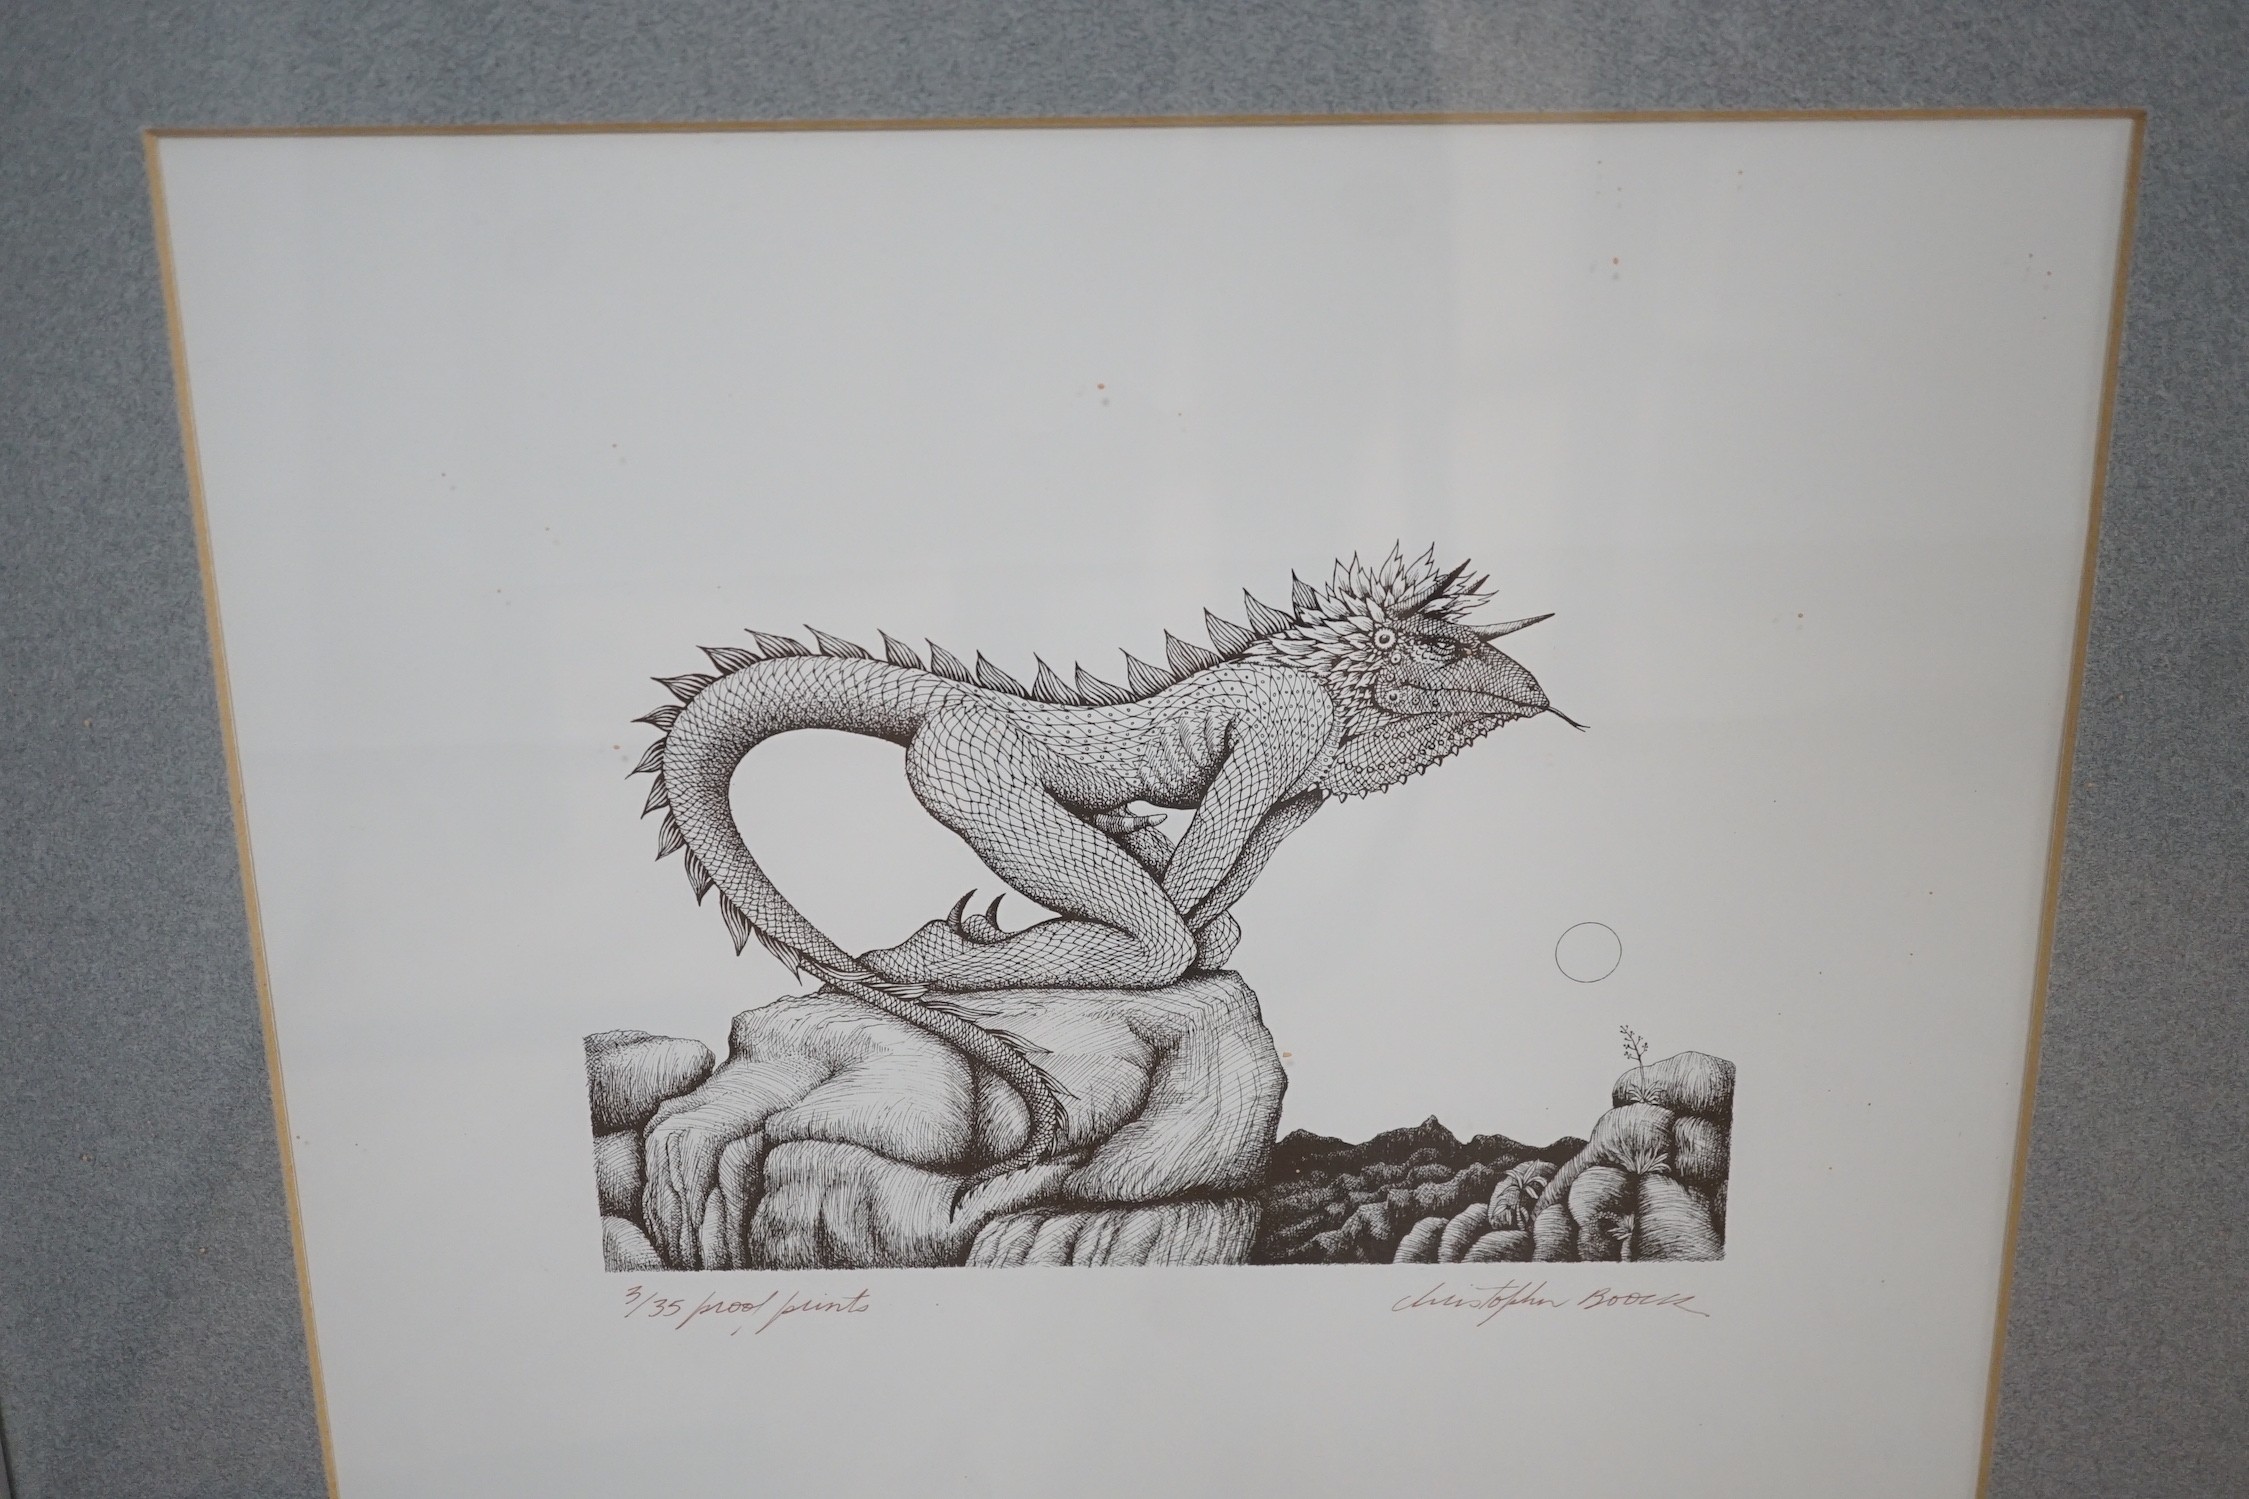 Christopher Boock (b.1947), two artist proof prints, 'Huntsman in a landscape' and 'Lizard man', signed and numbered 3/35, overall 30 x 26cm and 28 x 30cm